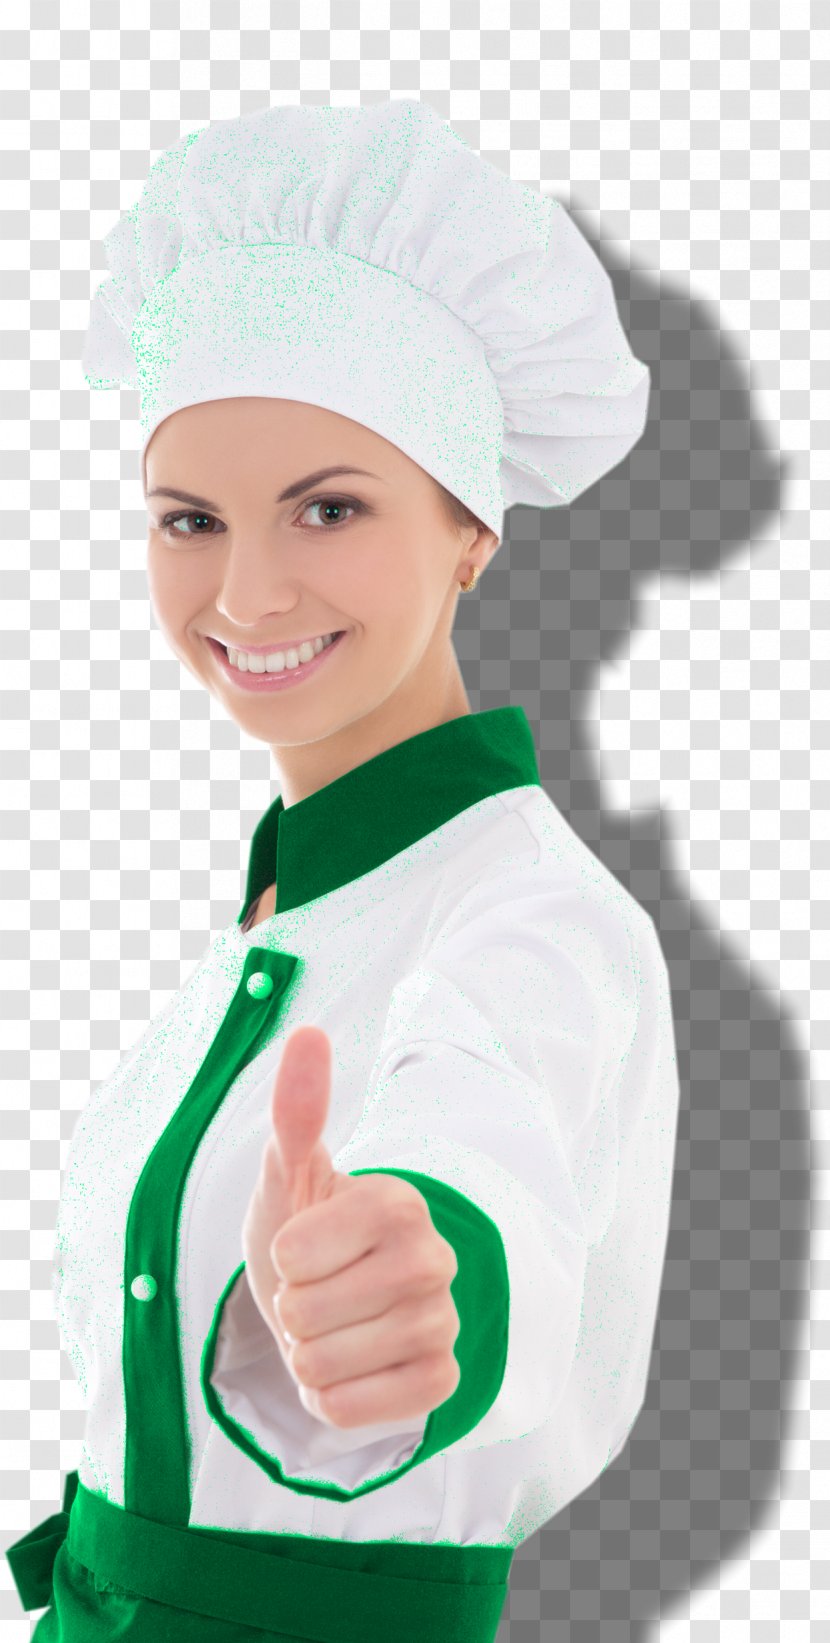 Hat Chief Cook Medical Glove Cooking - Professional - Helal Transparent PNG